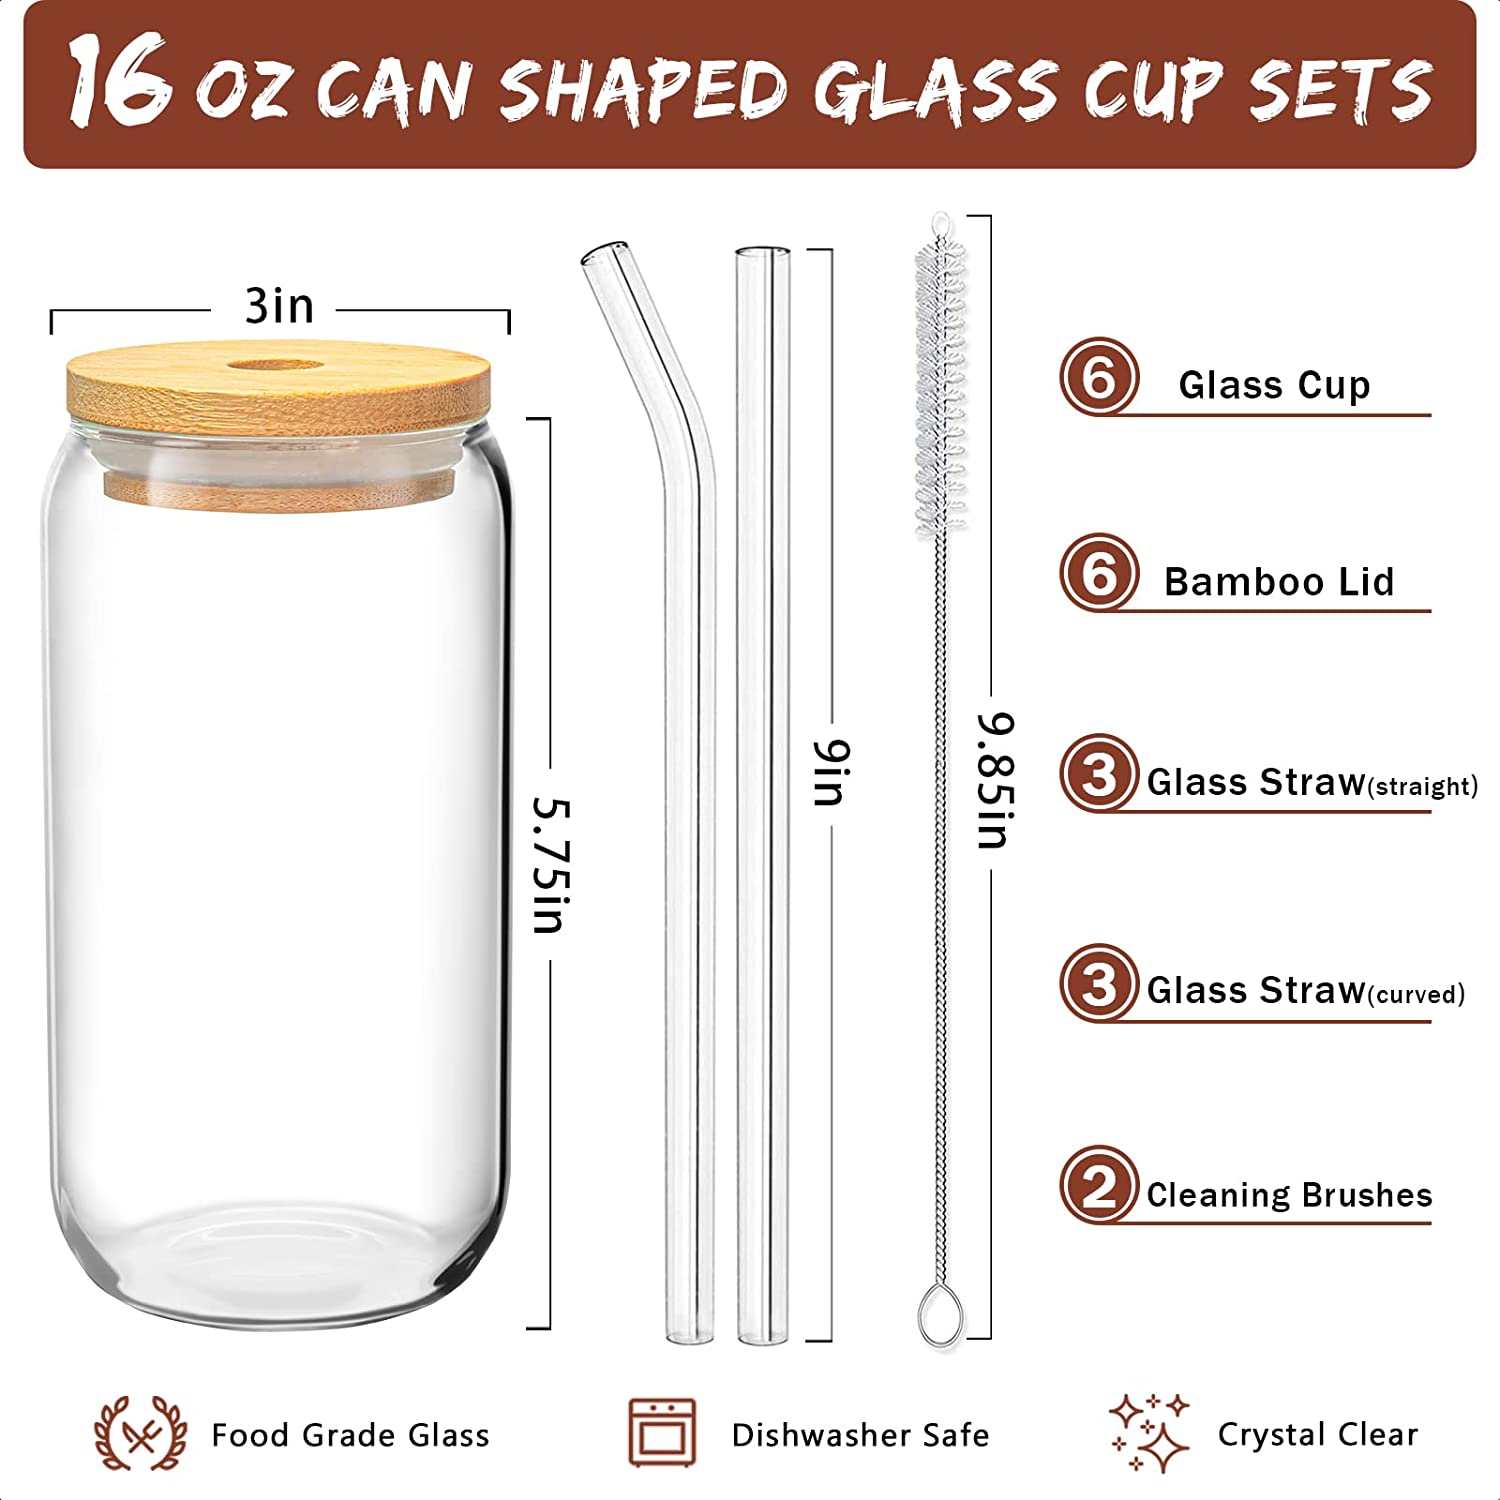 Scoozee Drinking Glasses with Bamboo Lids and Glass Straws - 16 oz, Se